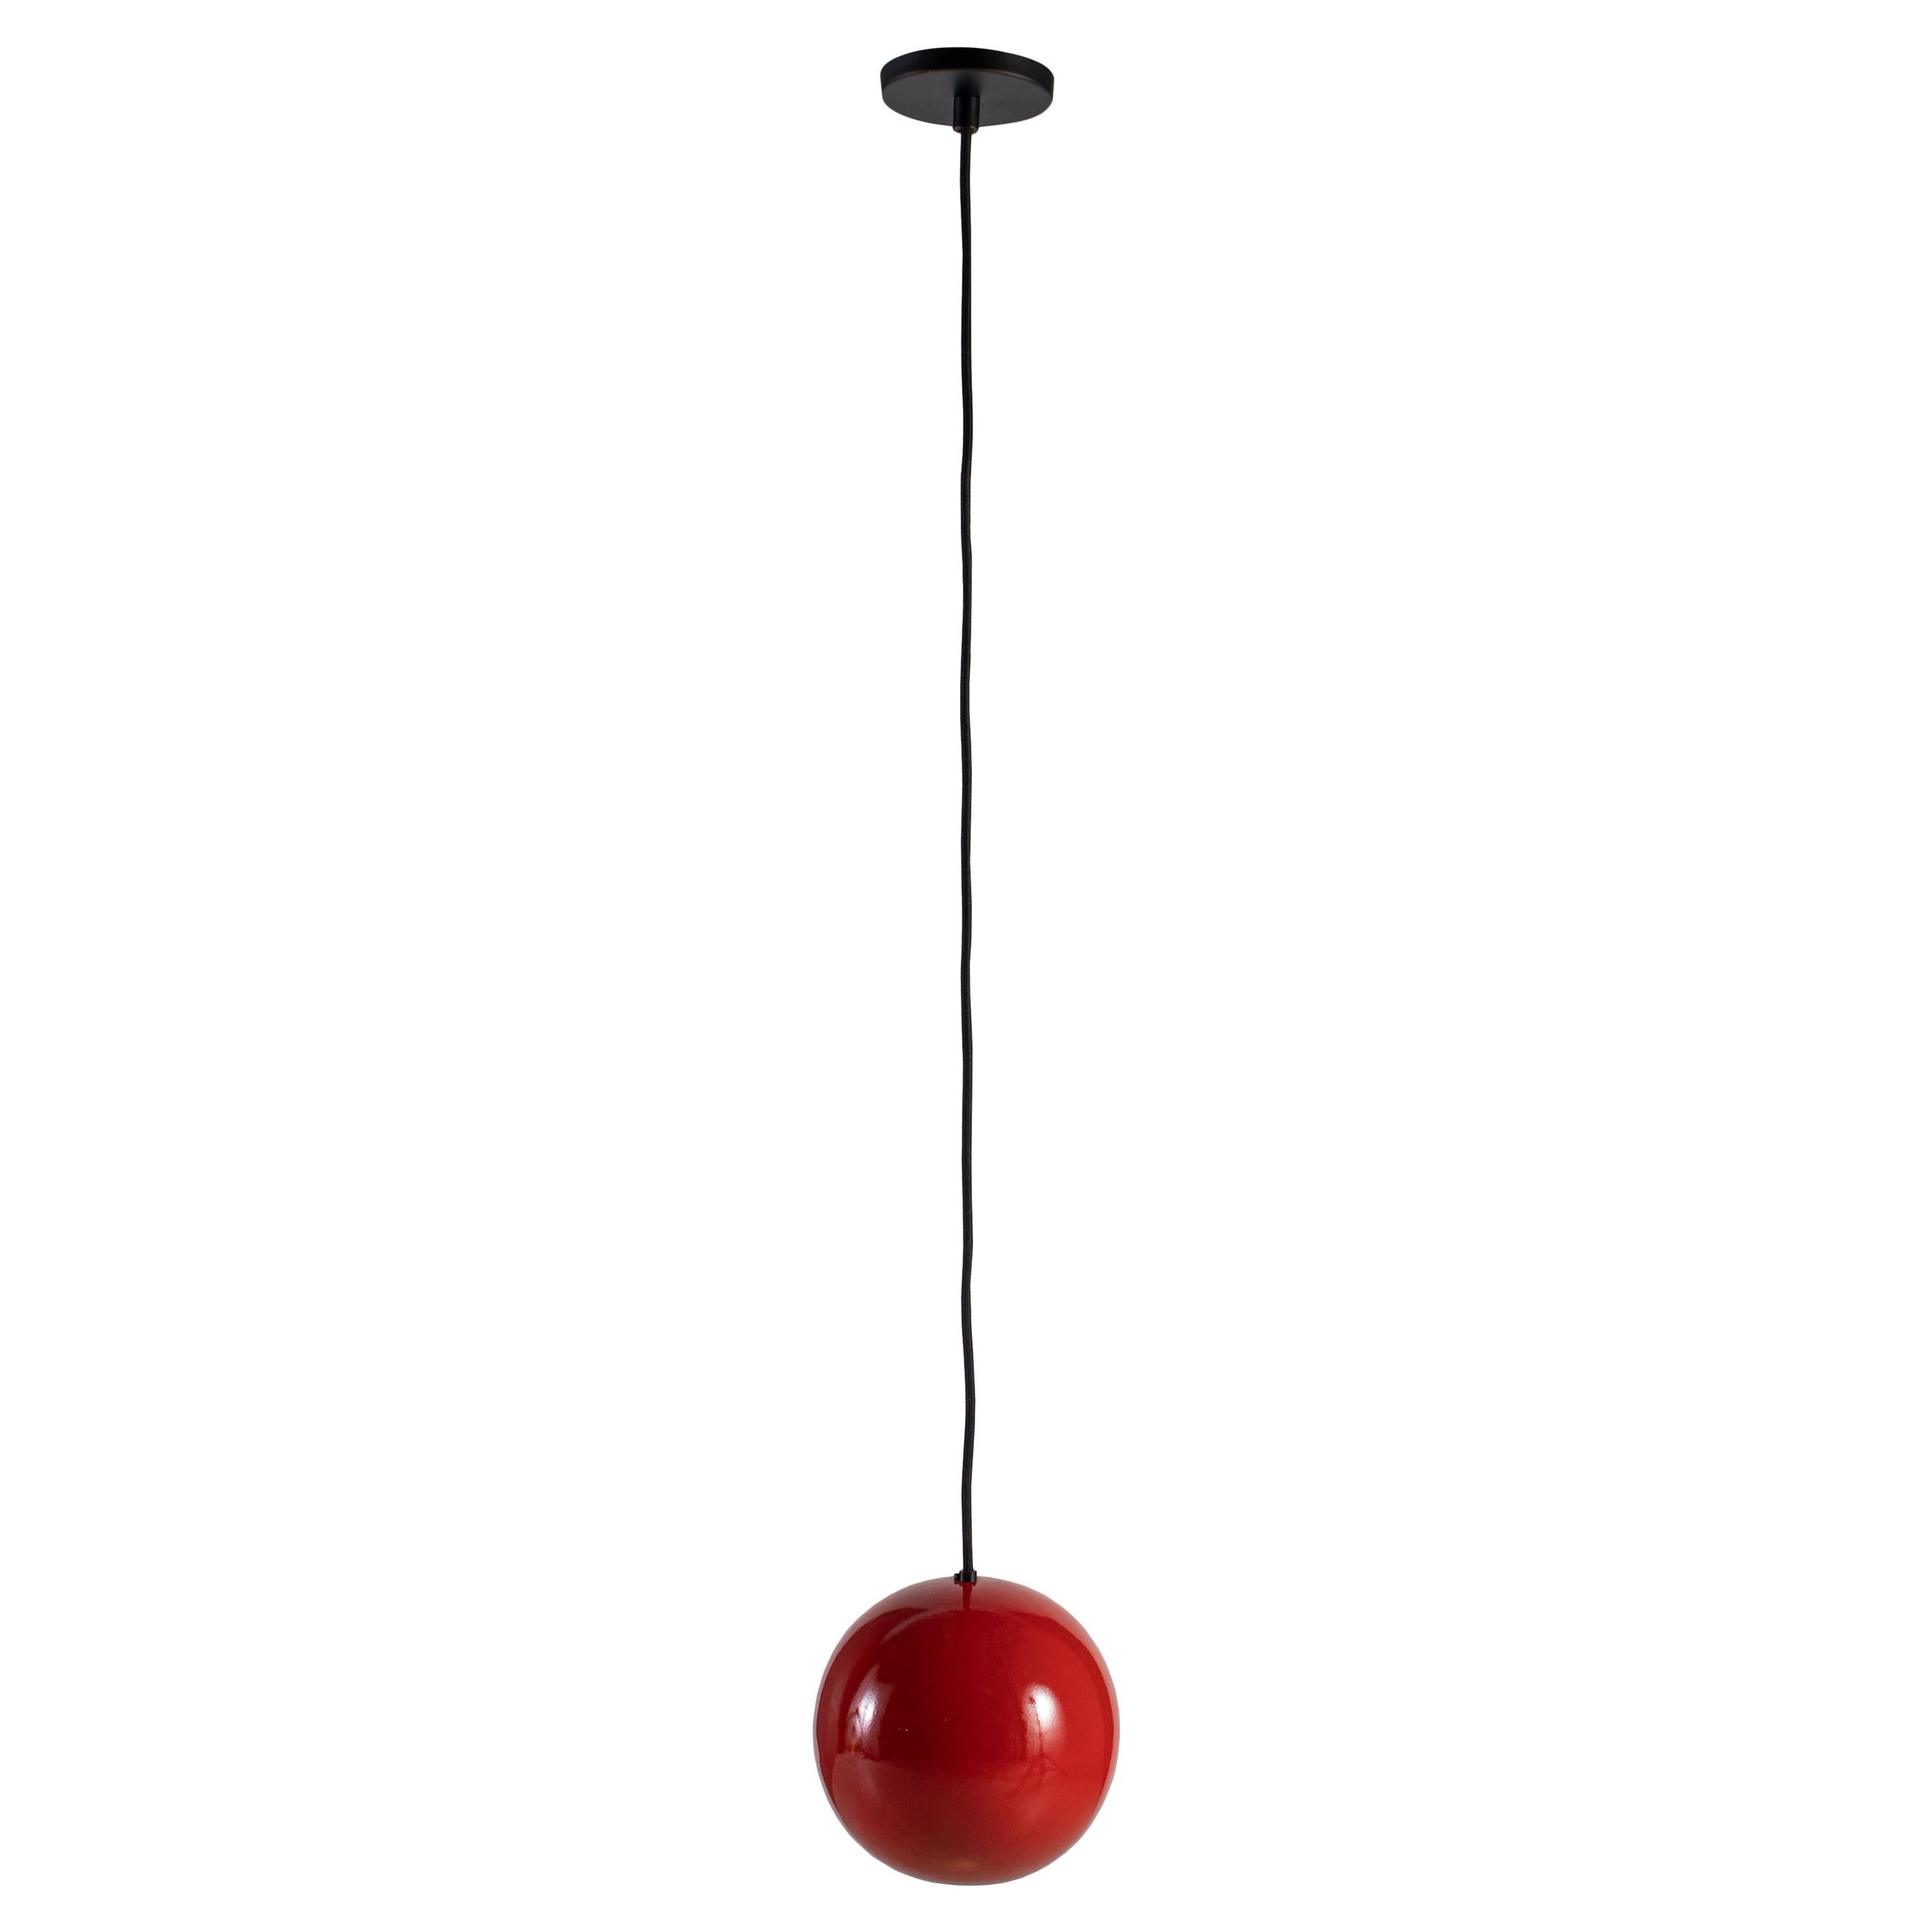 RENG, Tama Red, Hand Formed Ceramic, Ball Form Down Light